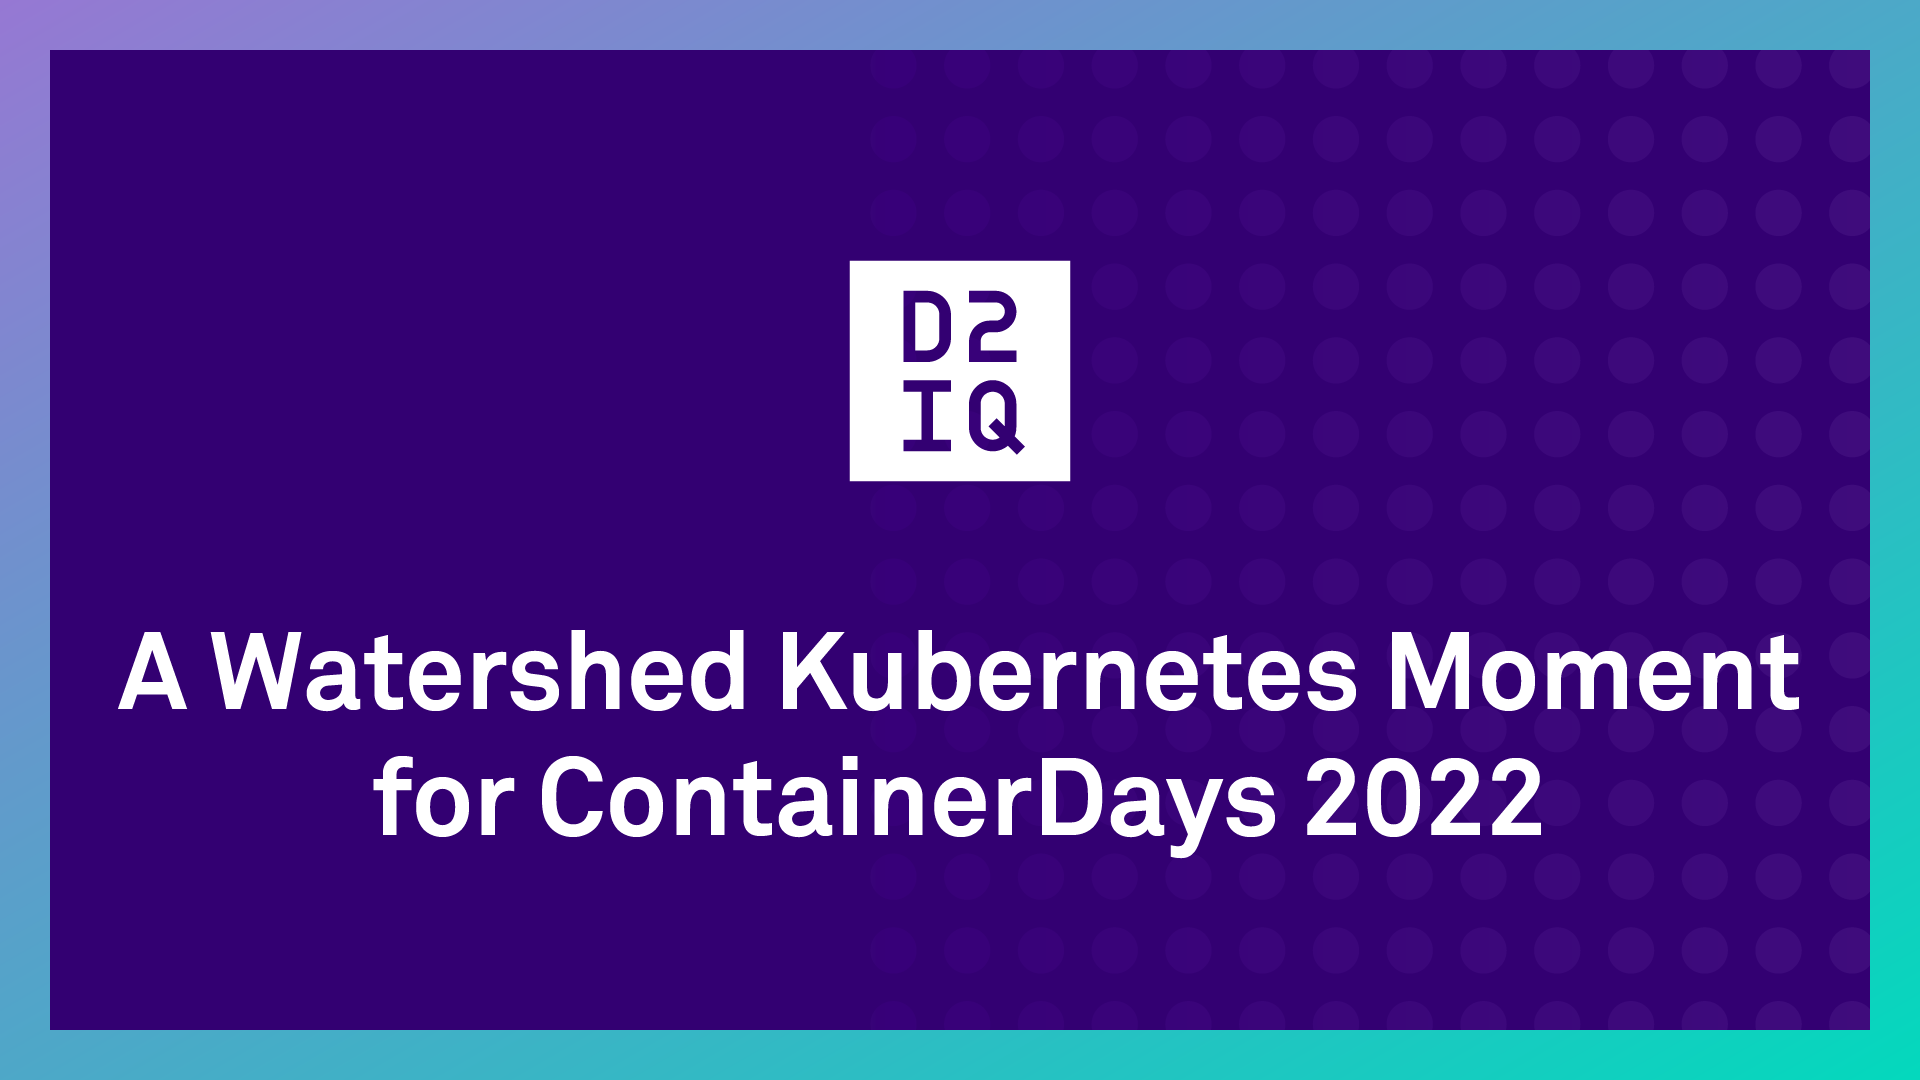 Watershed Kubernetes Moment for ContainerDays 2022